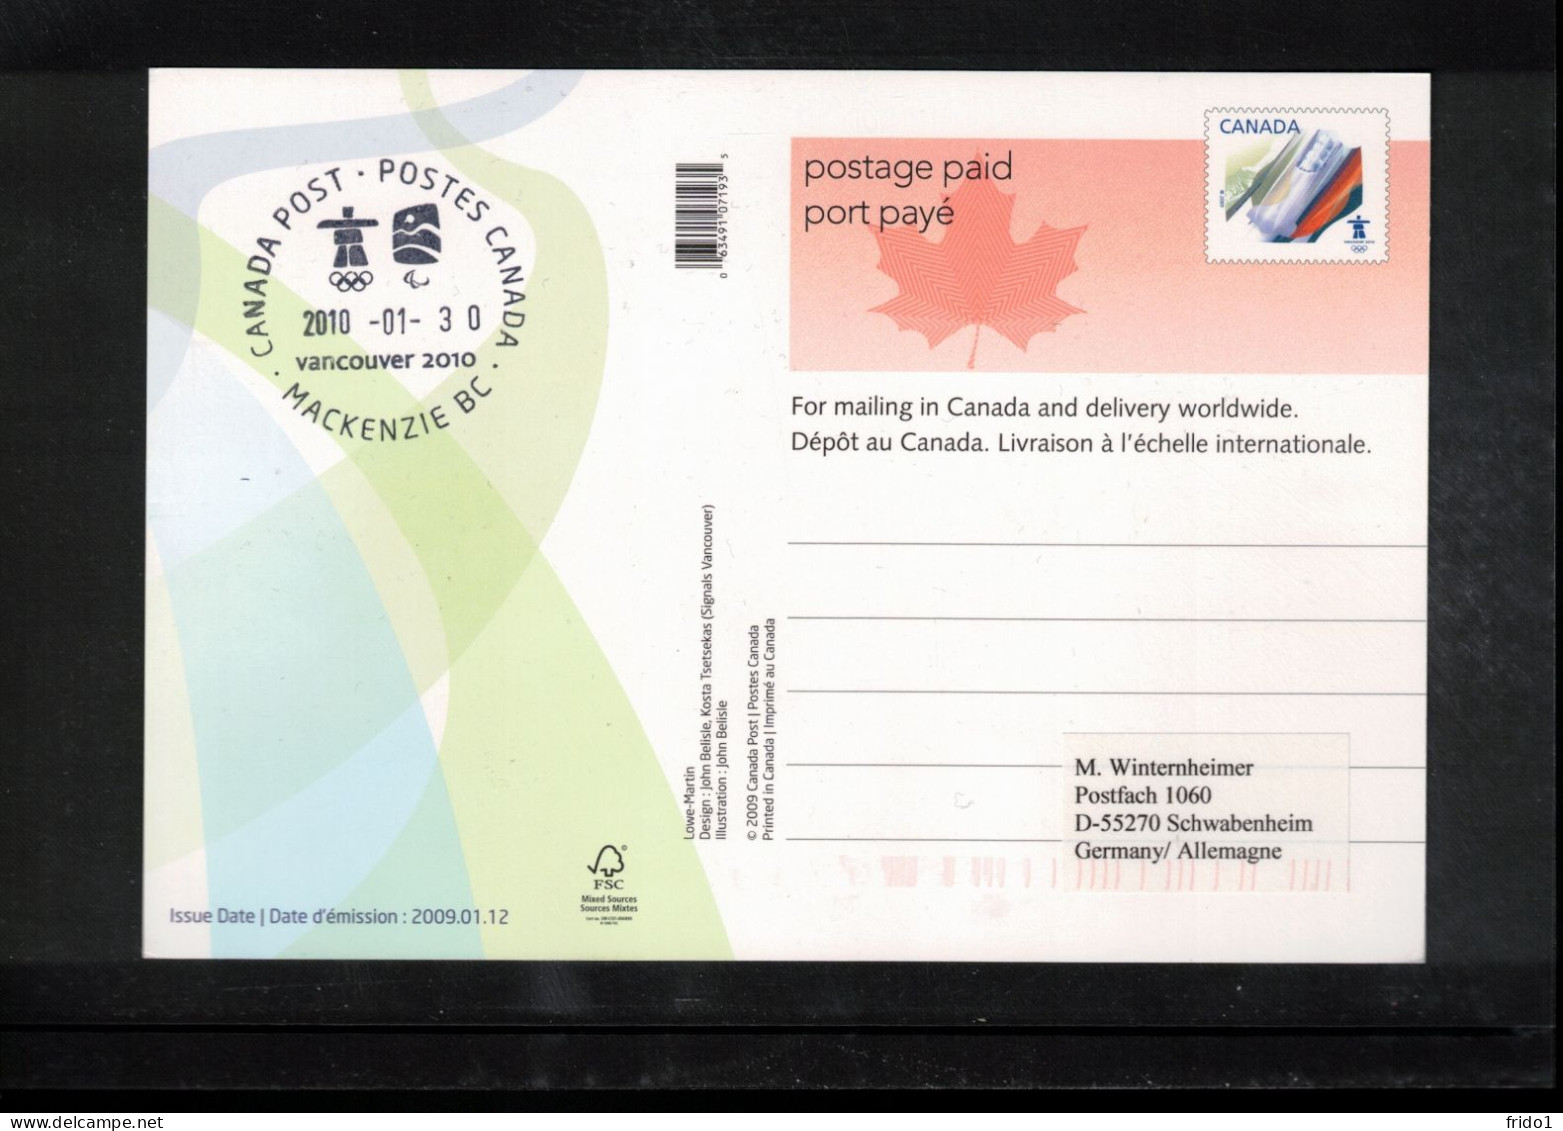 Canada 2010 Olympic Games Vancouver - MACKENZIE BC Postmark Interesting Postcard - Hiver 2010: Vancouver